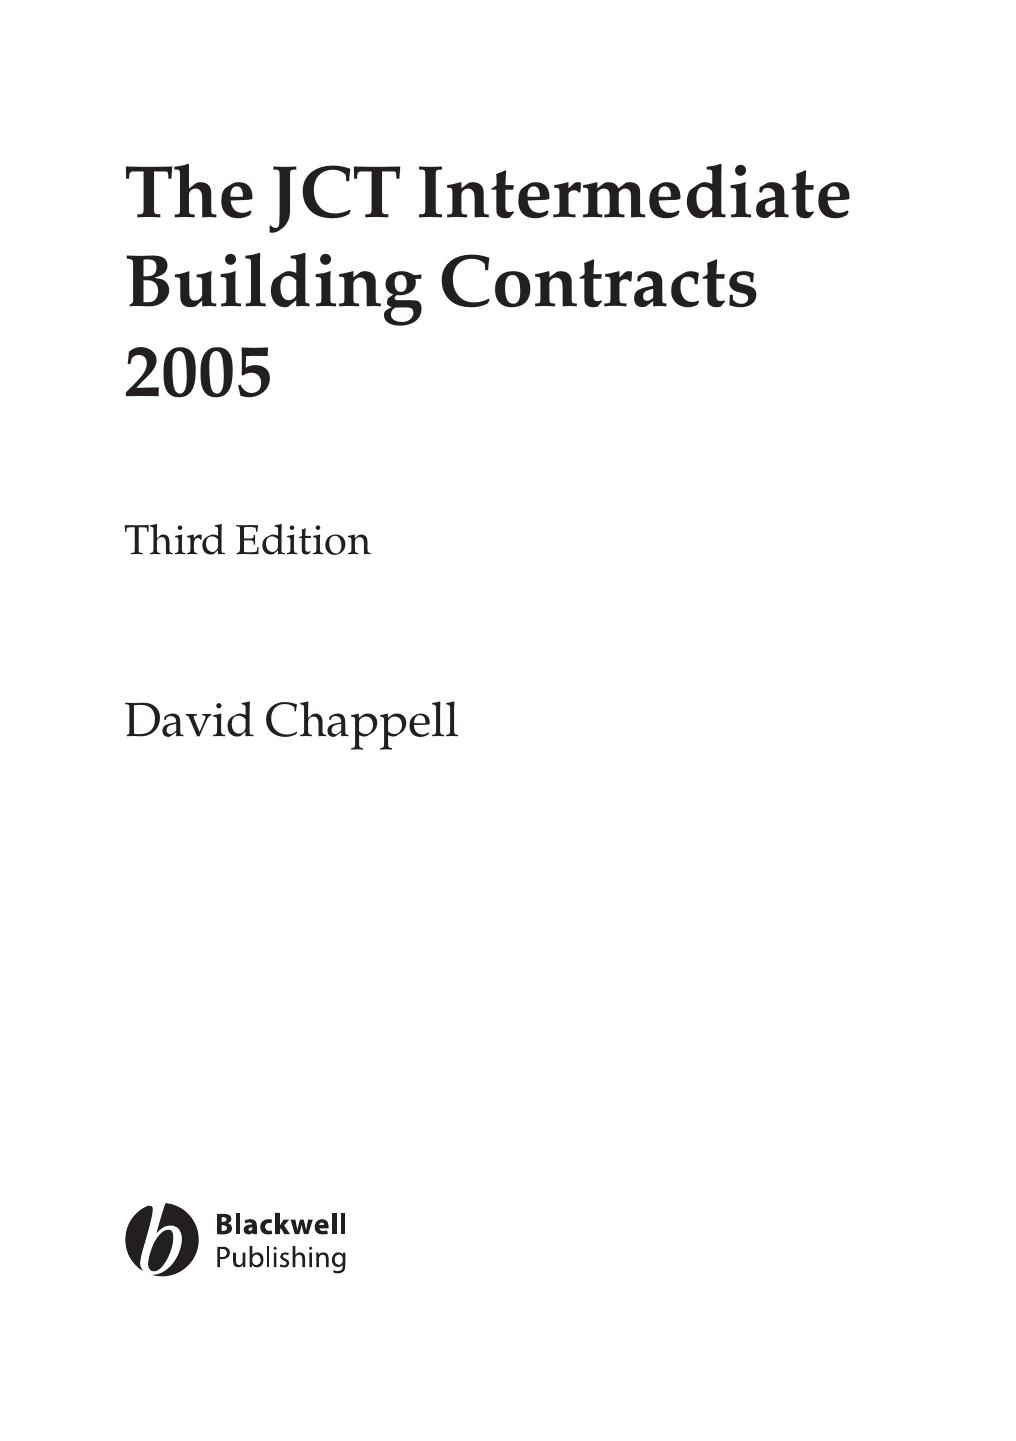 The JCT Intermediate Building Contracts  2005